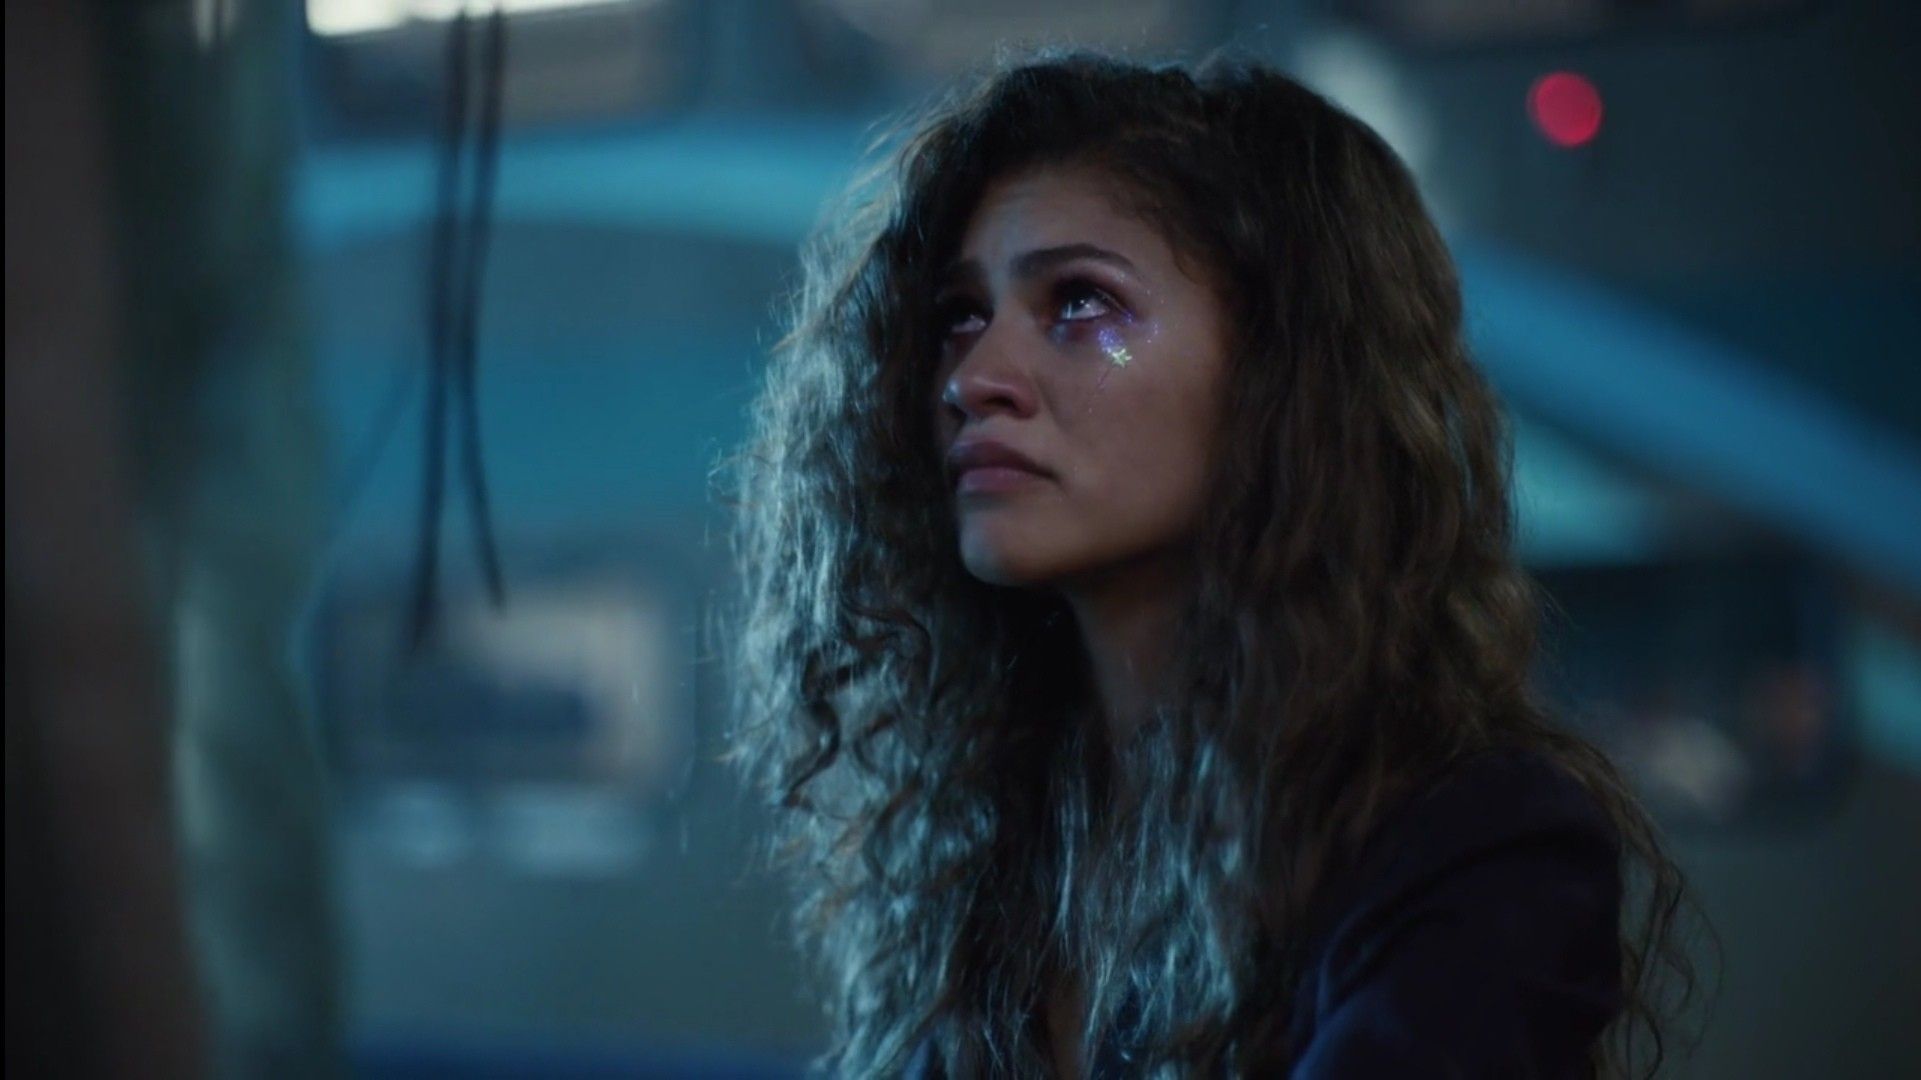 Rue is visibly distraught just before she relapses in the Season 1 Finale of 'Euphoria' (2019-).